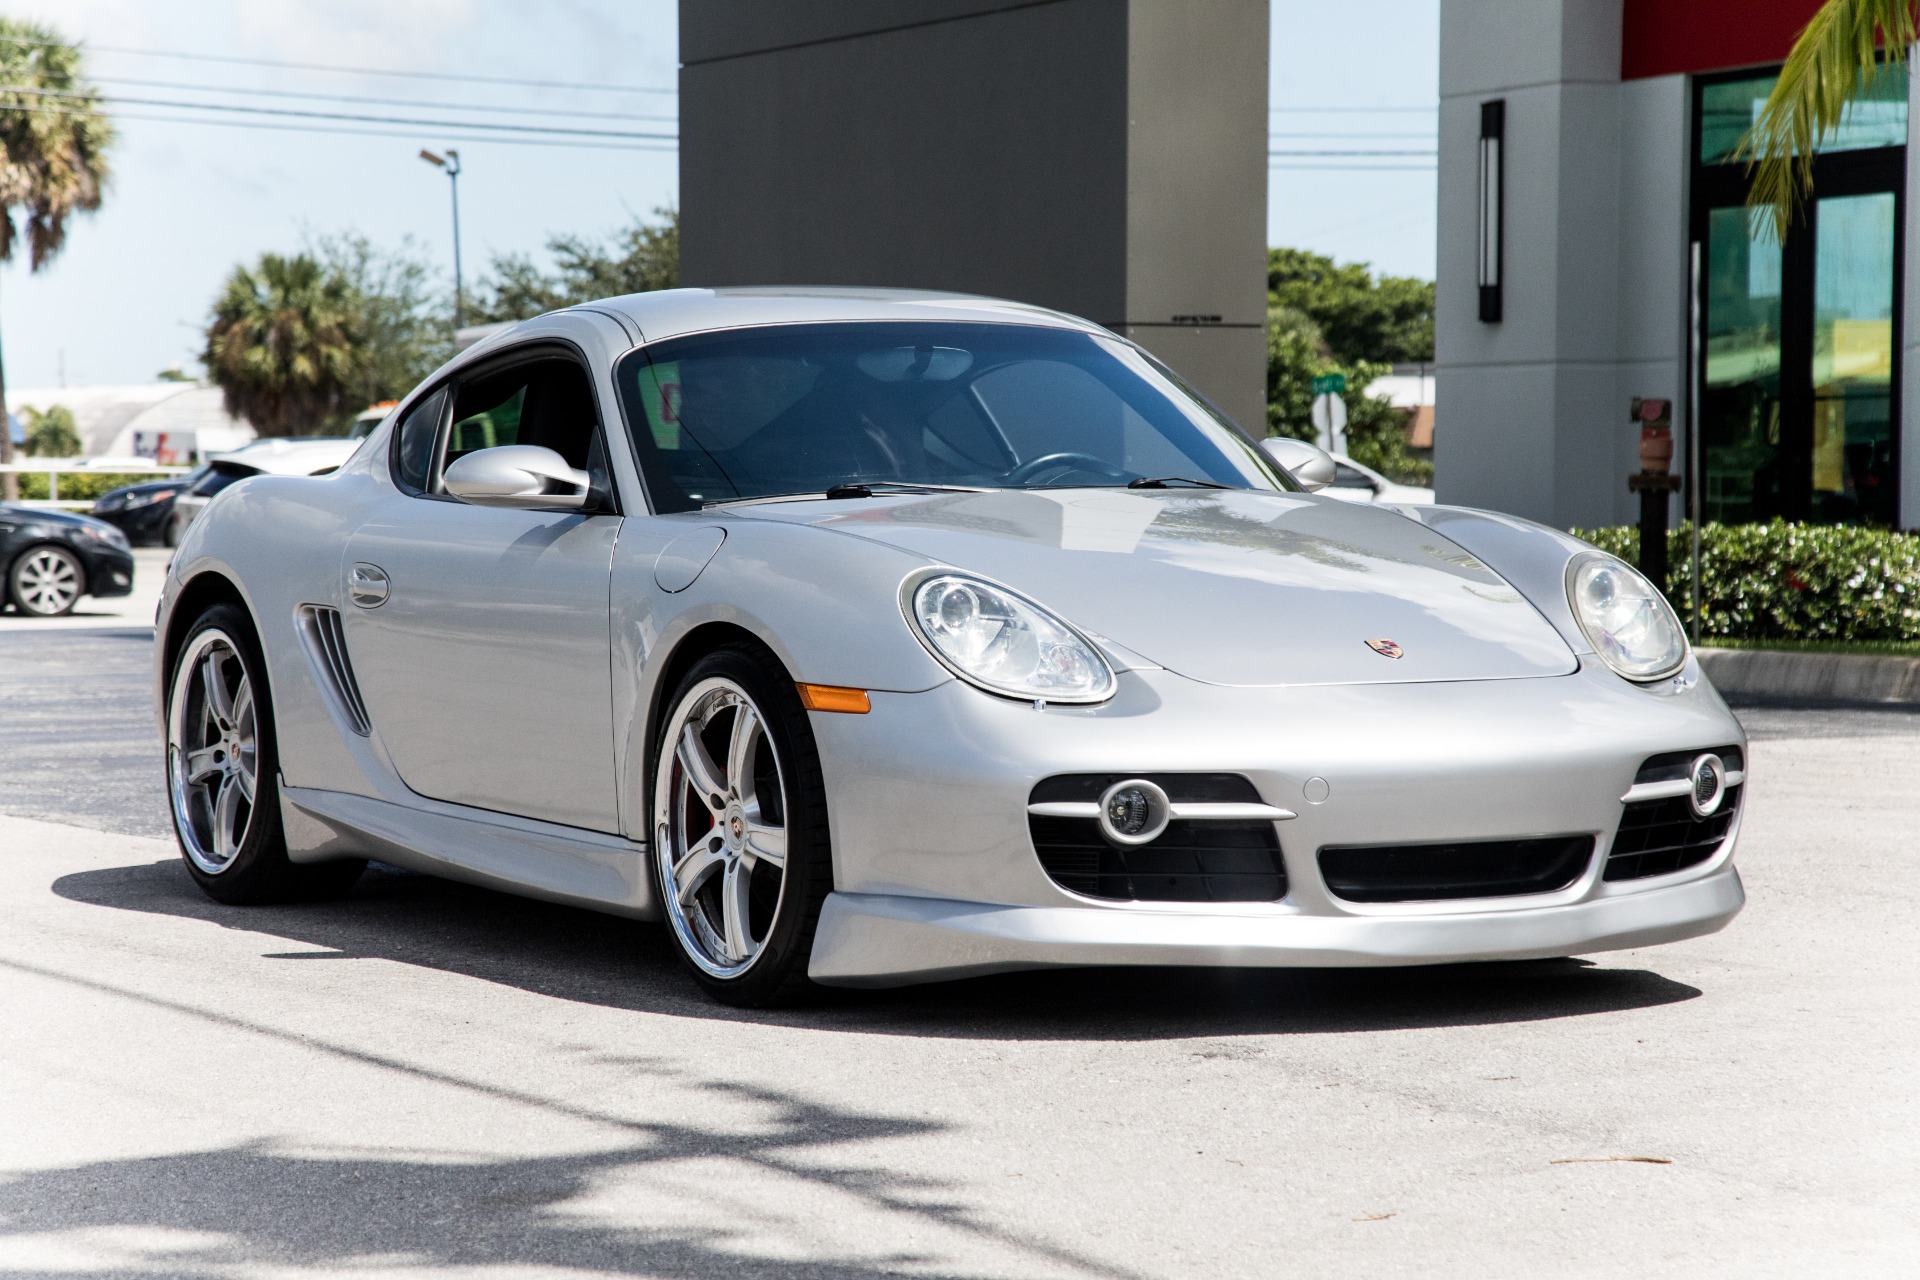 Used 2006 Porsche Cayman S For Sale ($29,900) | Marino Performance